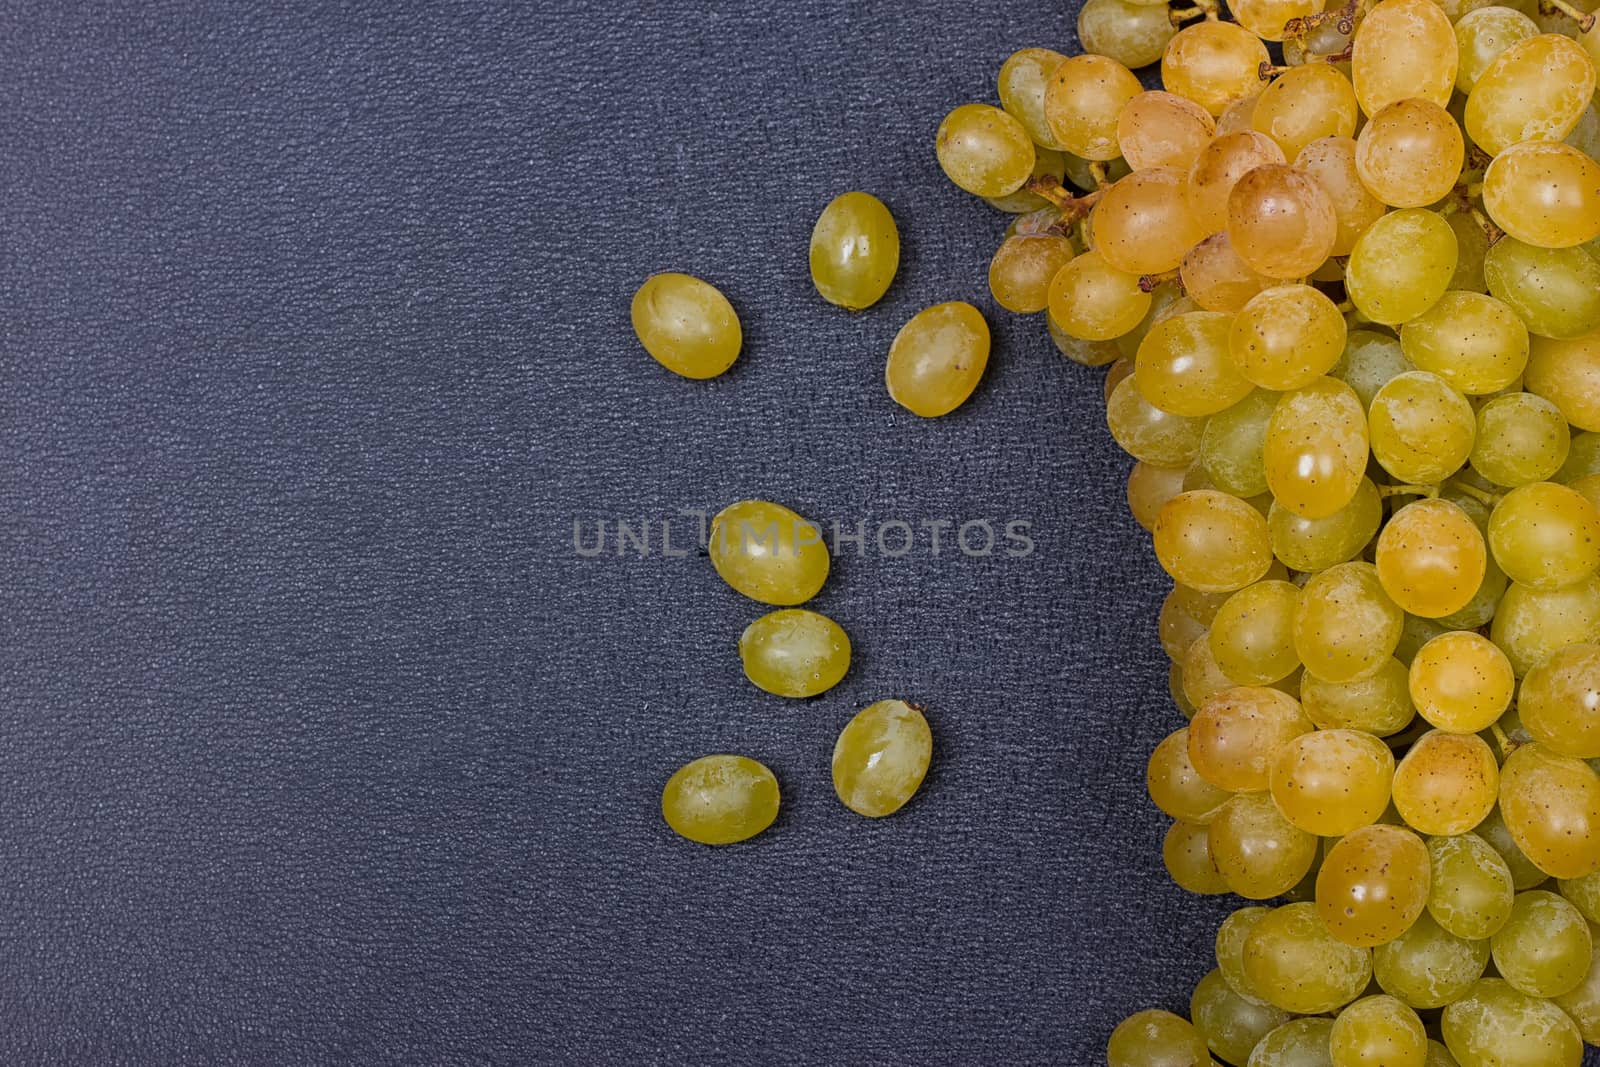 White grapes on a black background. copy-cpace